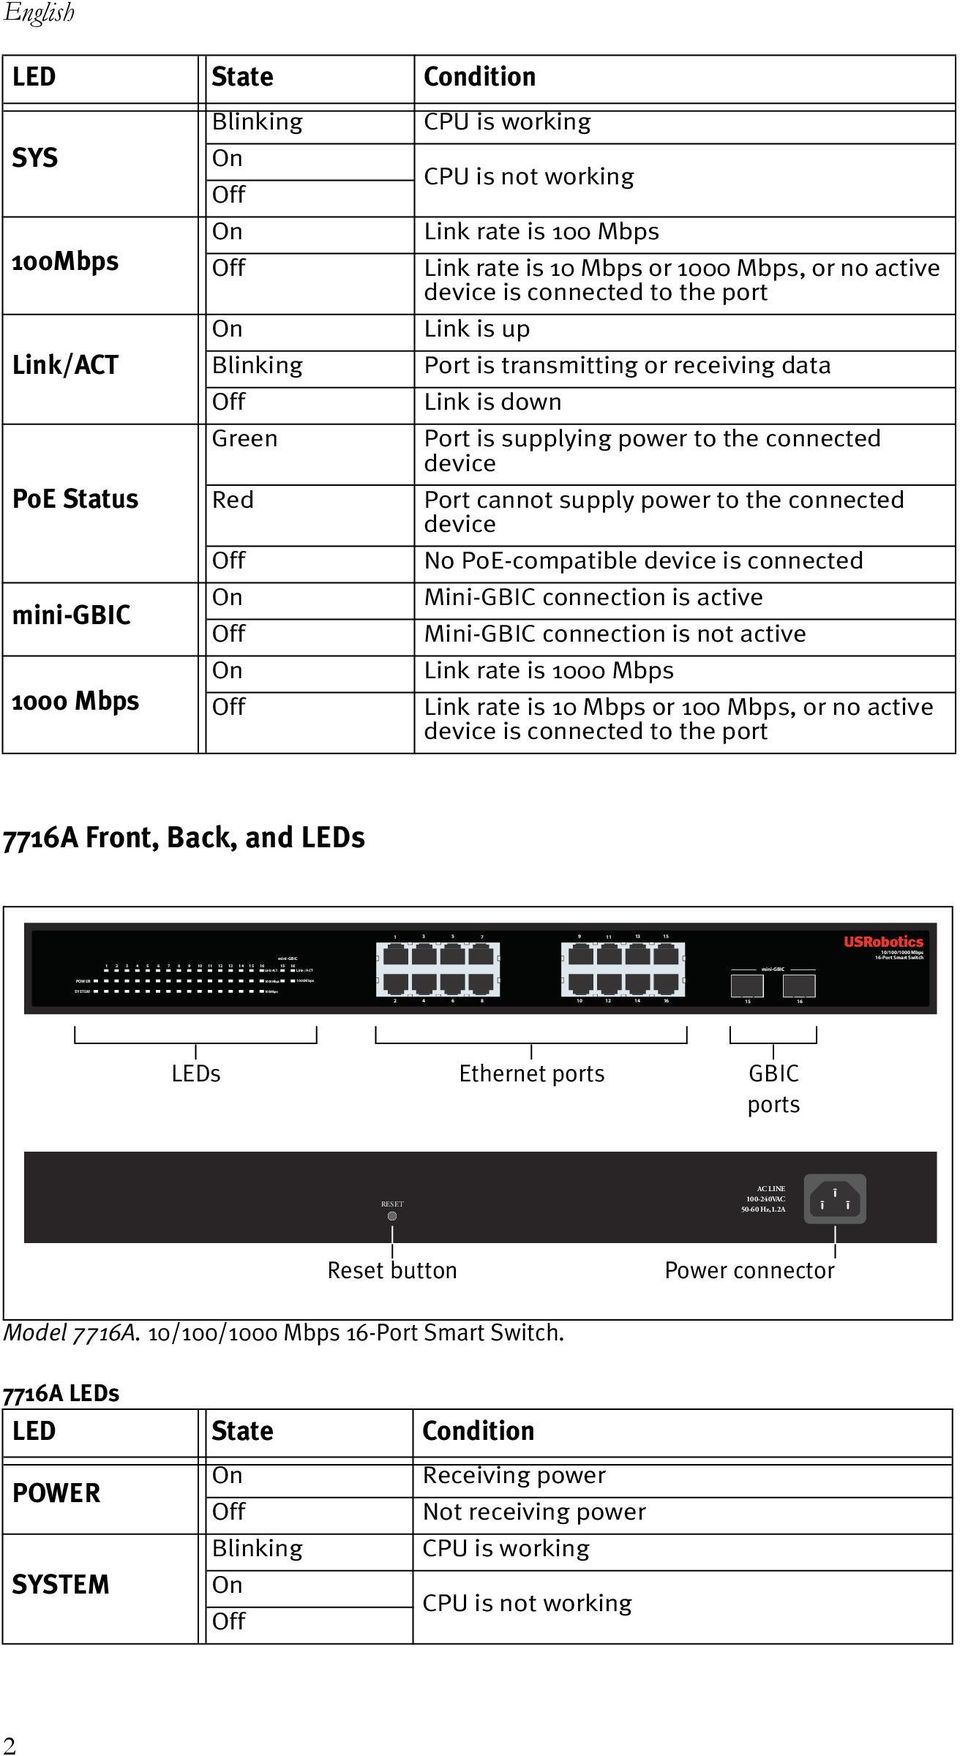 PoE Status Red Port cannot supply power to the connected device Off No PoE-compatible device is connected On Mini-GBIC connection is active Off Mini-GBIC connection is not active On Link rate is 1000